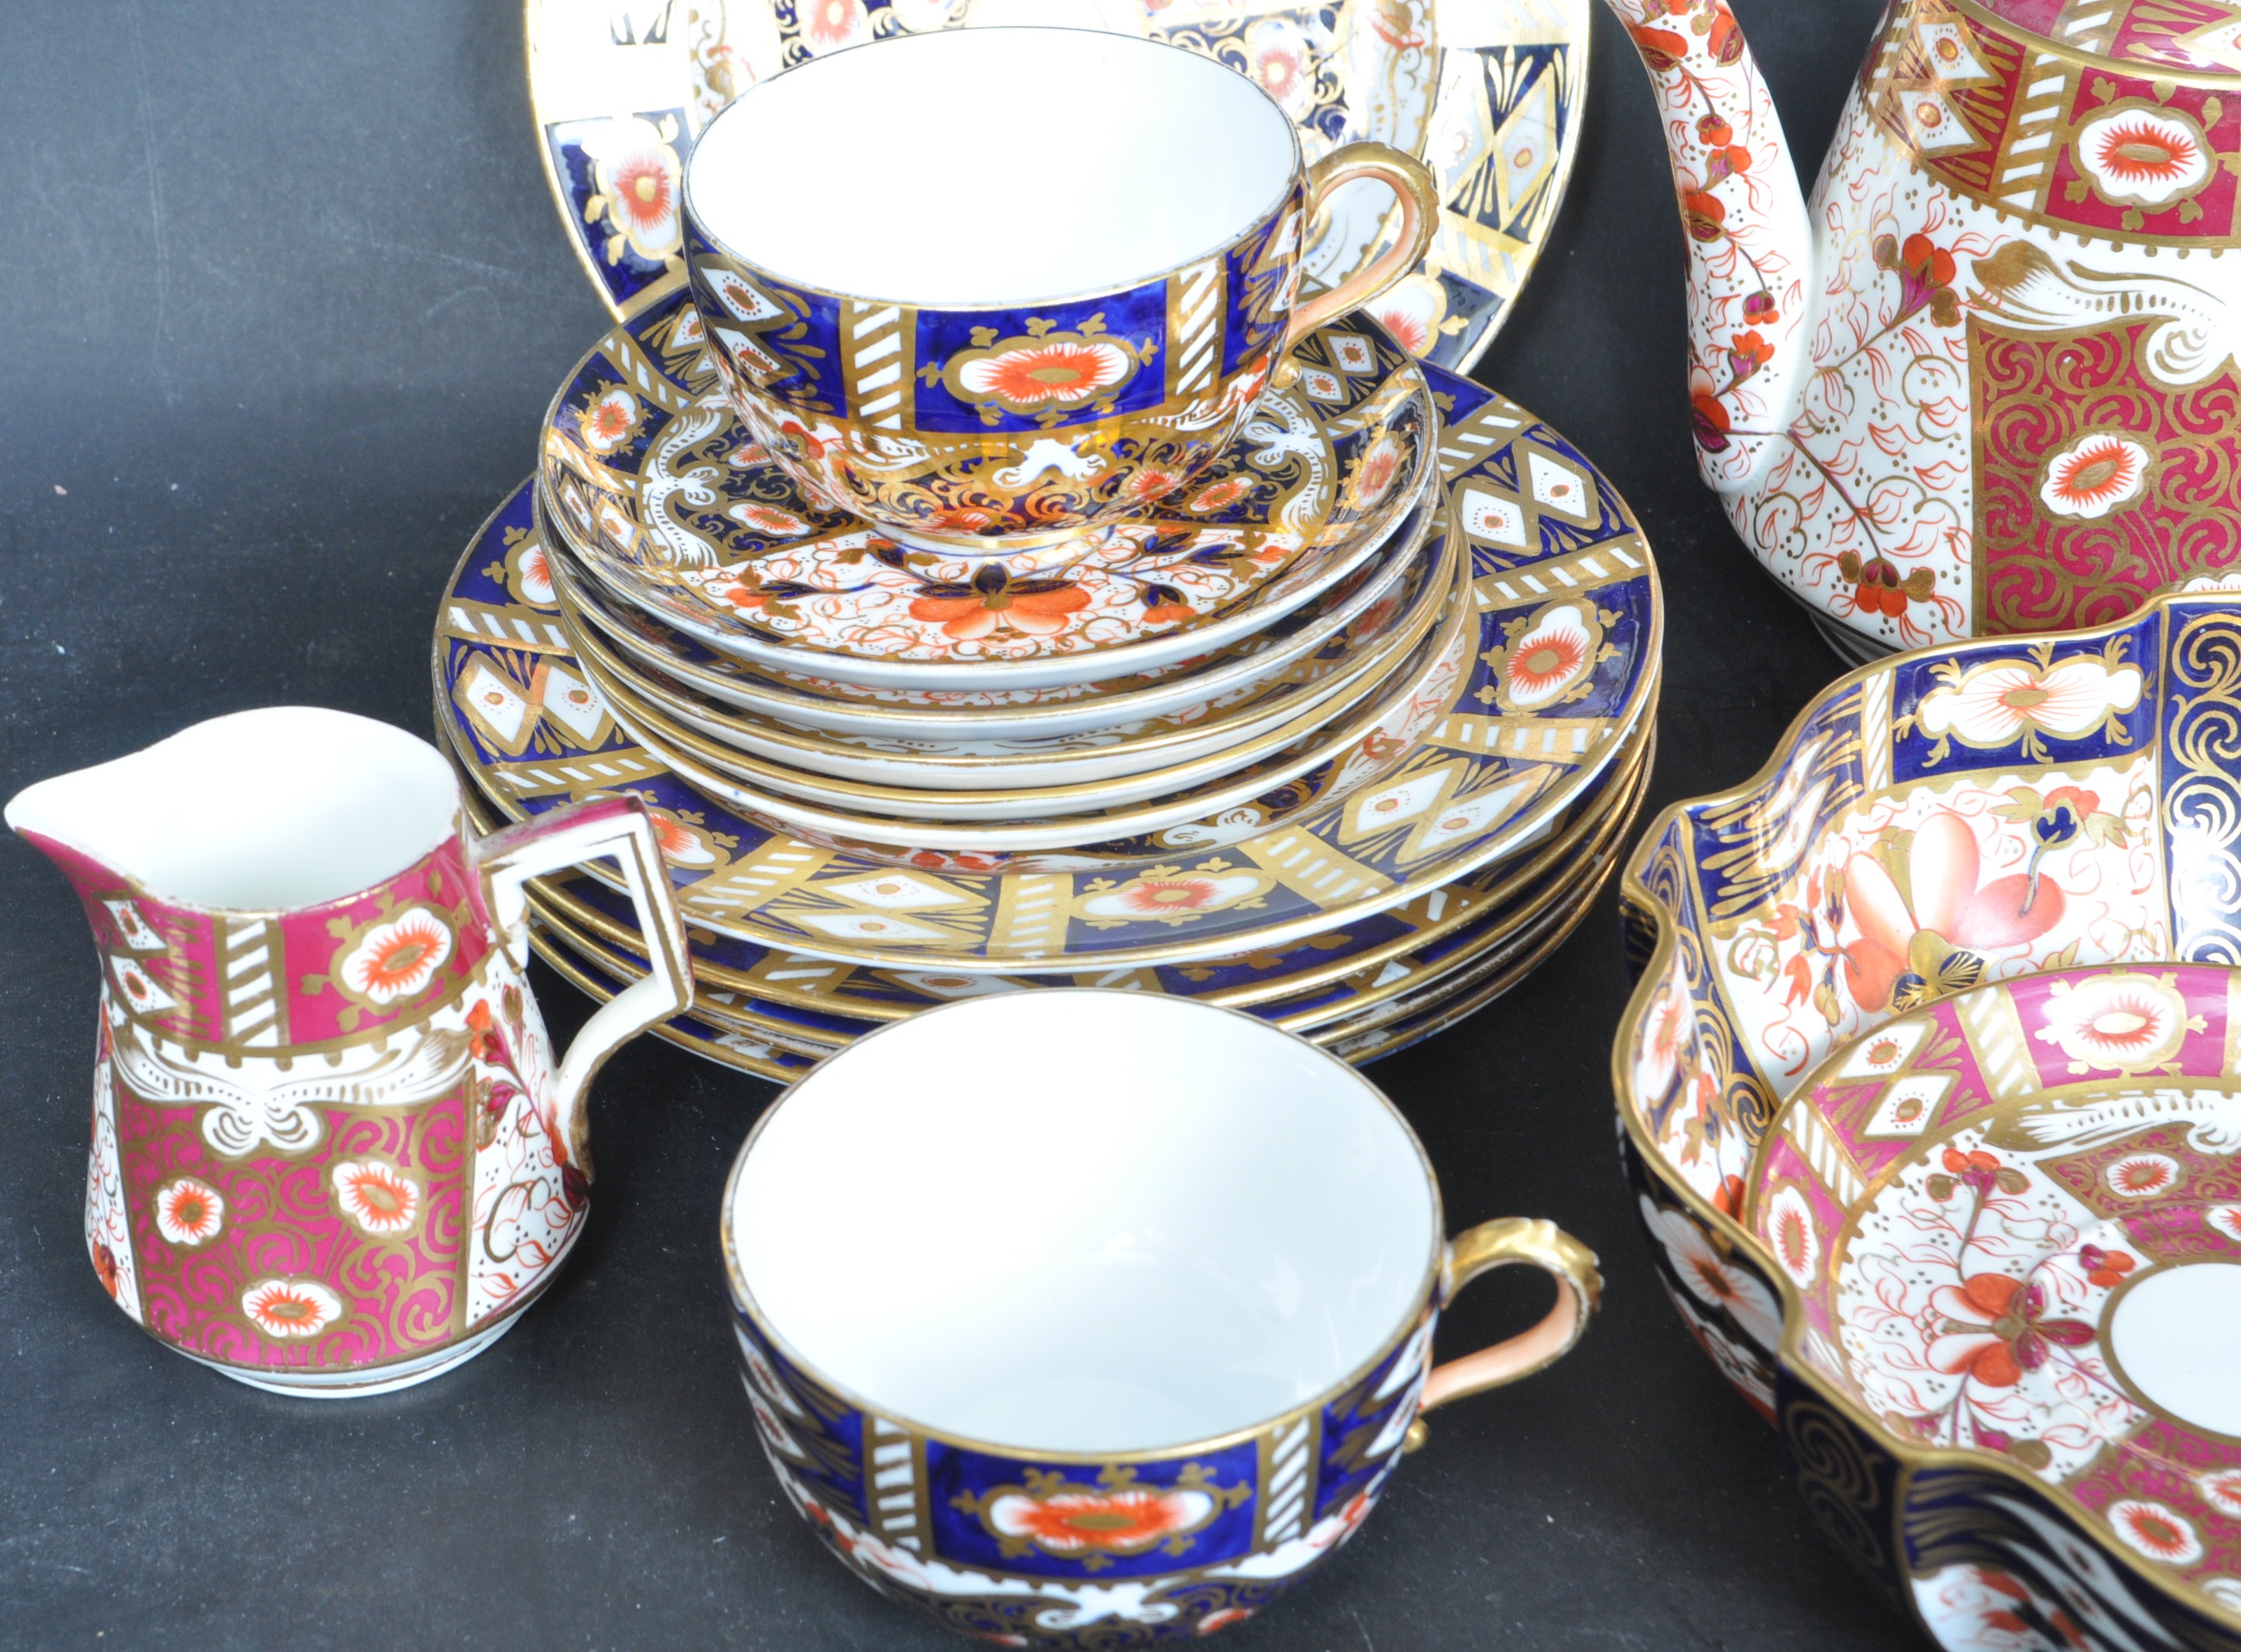 COLLECTION OF VINTAGE 20TH CENTURY ROYQL CROWN DERBY IMARI PATTERN CHINA AND MORE - Image 7 of 14